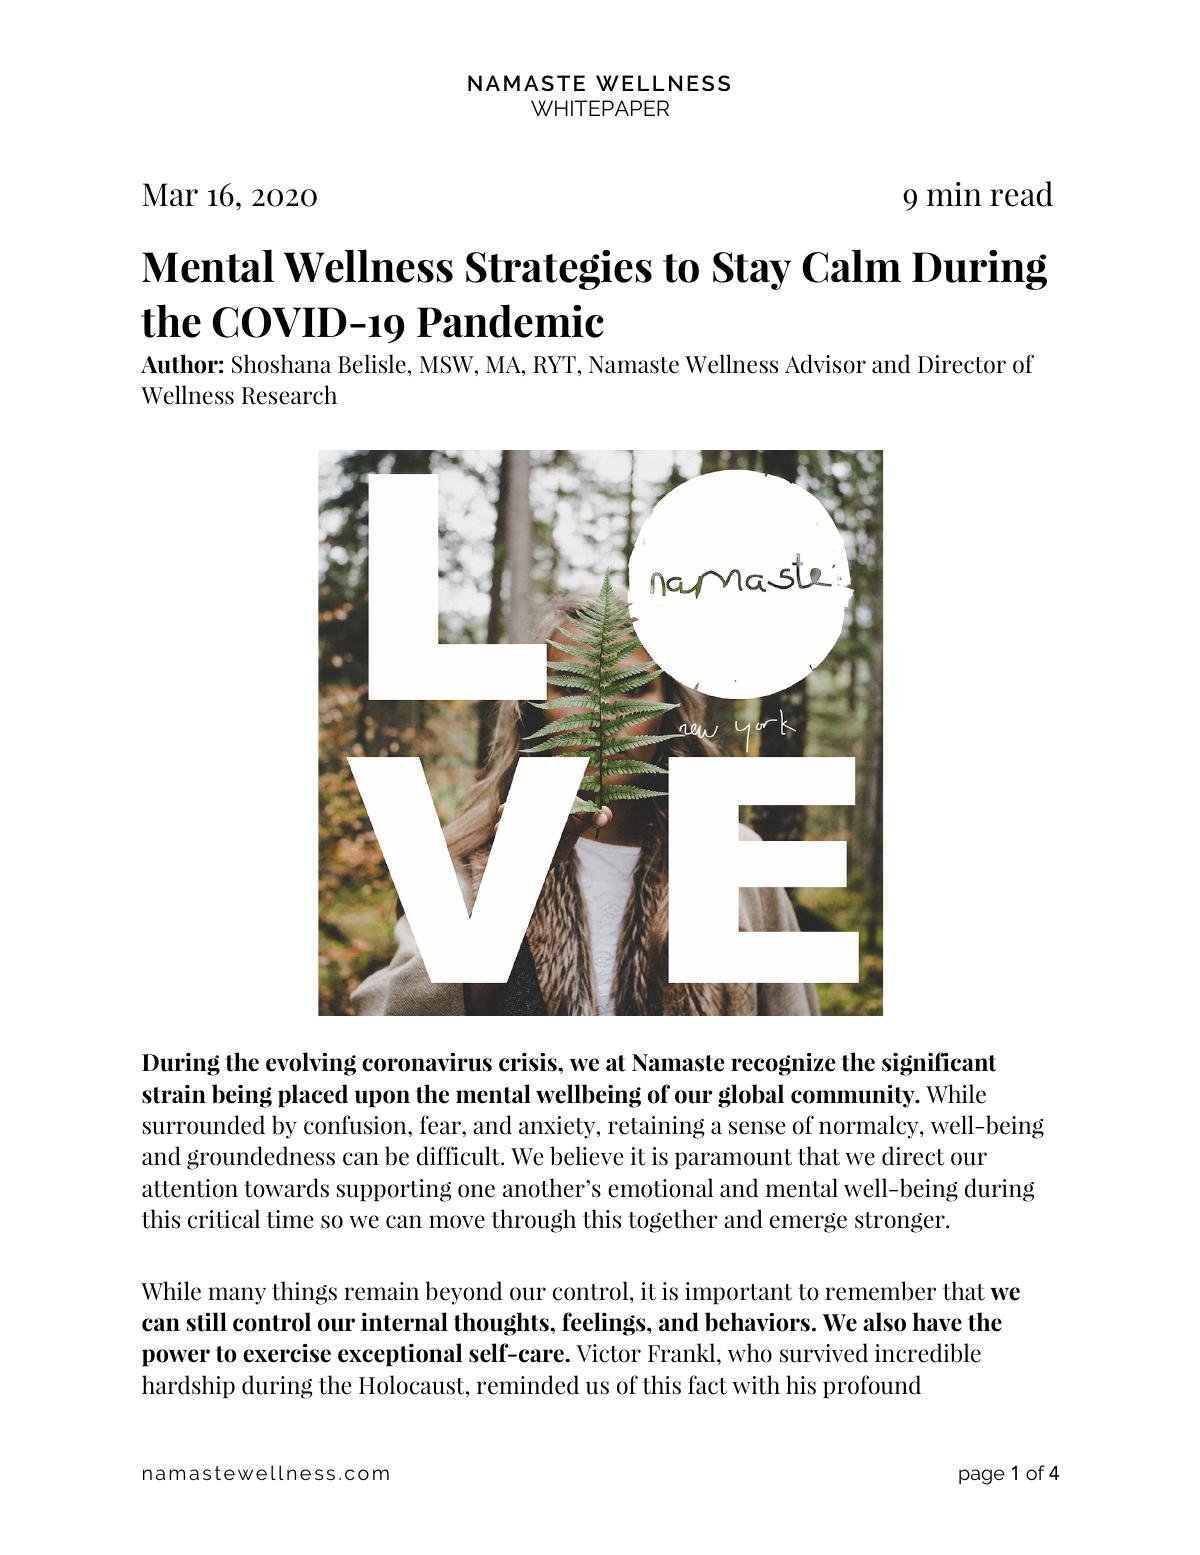 Mental Wellness Strategies to Stay Calm During the COVID-19 Pandemic